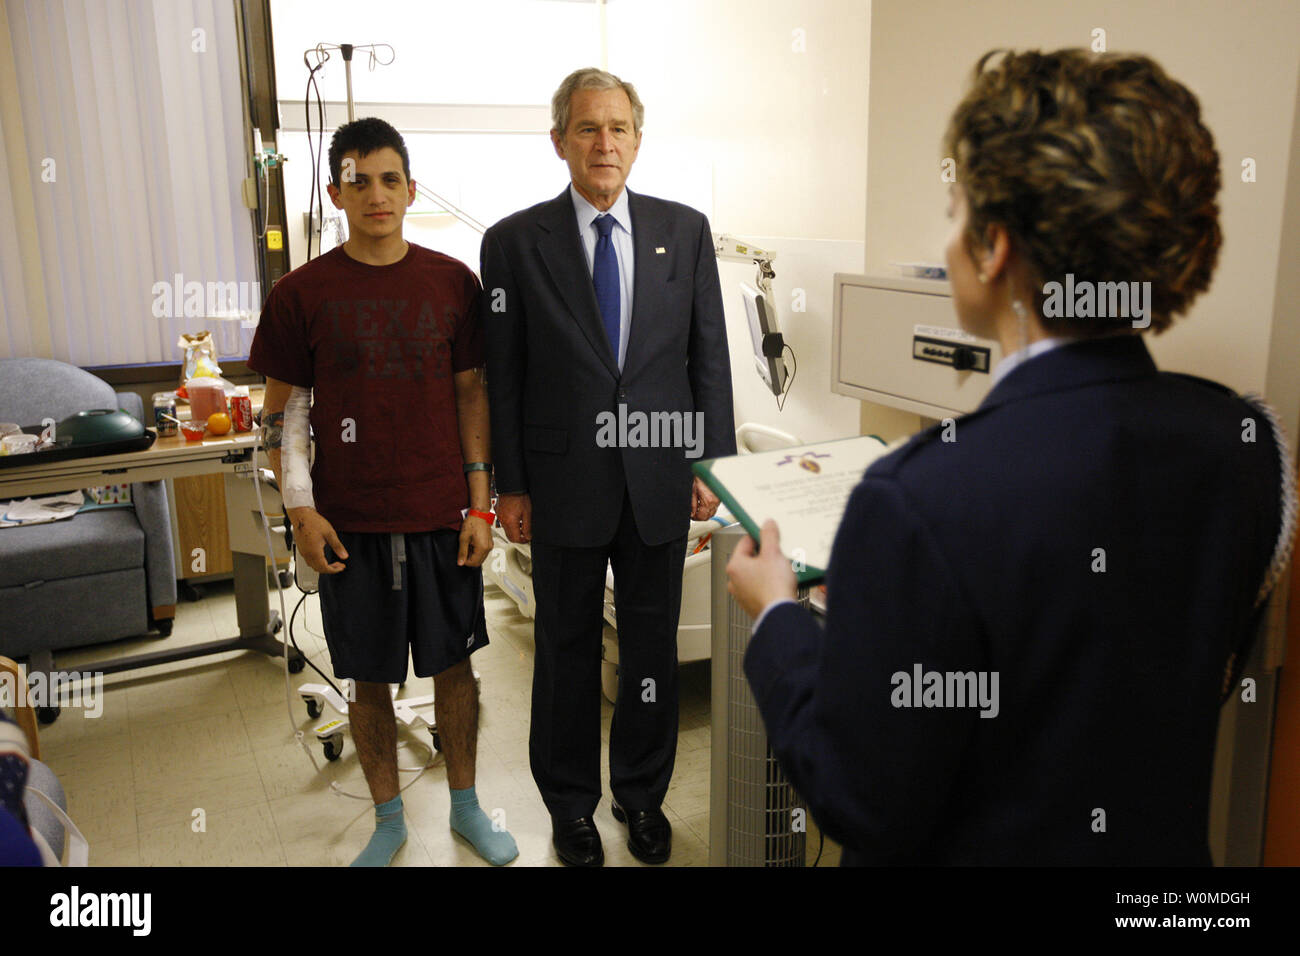 President George W. BushÊstands with U.S. Army Specialist Fernando Aguilar of Tucson, Arizona on December 22, 2008 atÊWalter Reed Army Medical Center in Washington, D.C., as a White House military aide reads Aguilar's Purple Heart citation. Aguilar is recoveringÊfrom injuries sustained when two hand grenades were thrown at his vehicle while on patrol in support ofÊthe war in Iraq.    (UPI Photo/Eric Draper/White House) Stock Photo